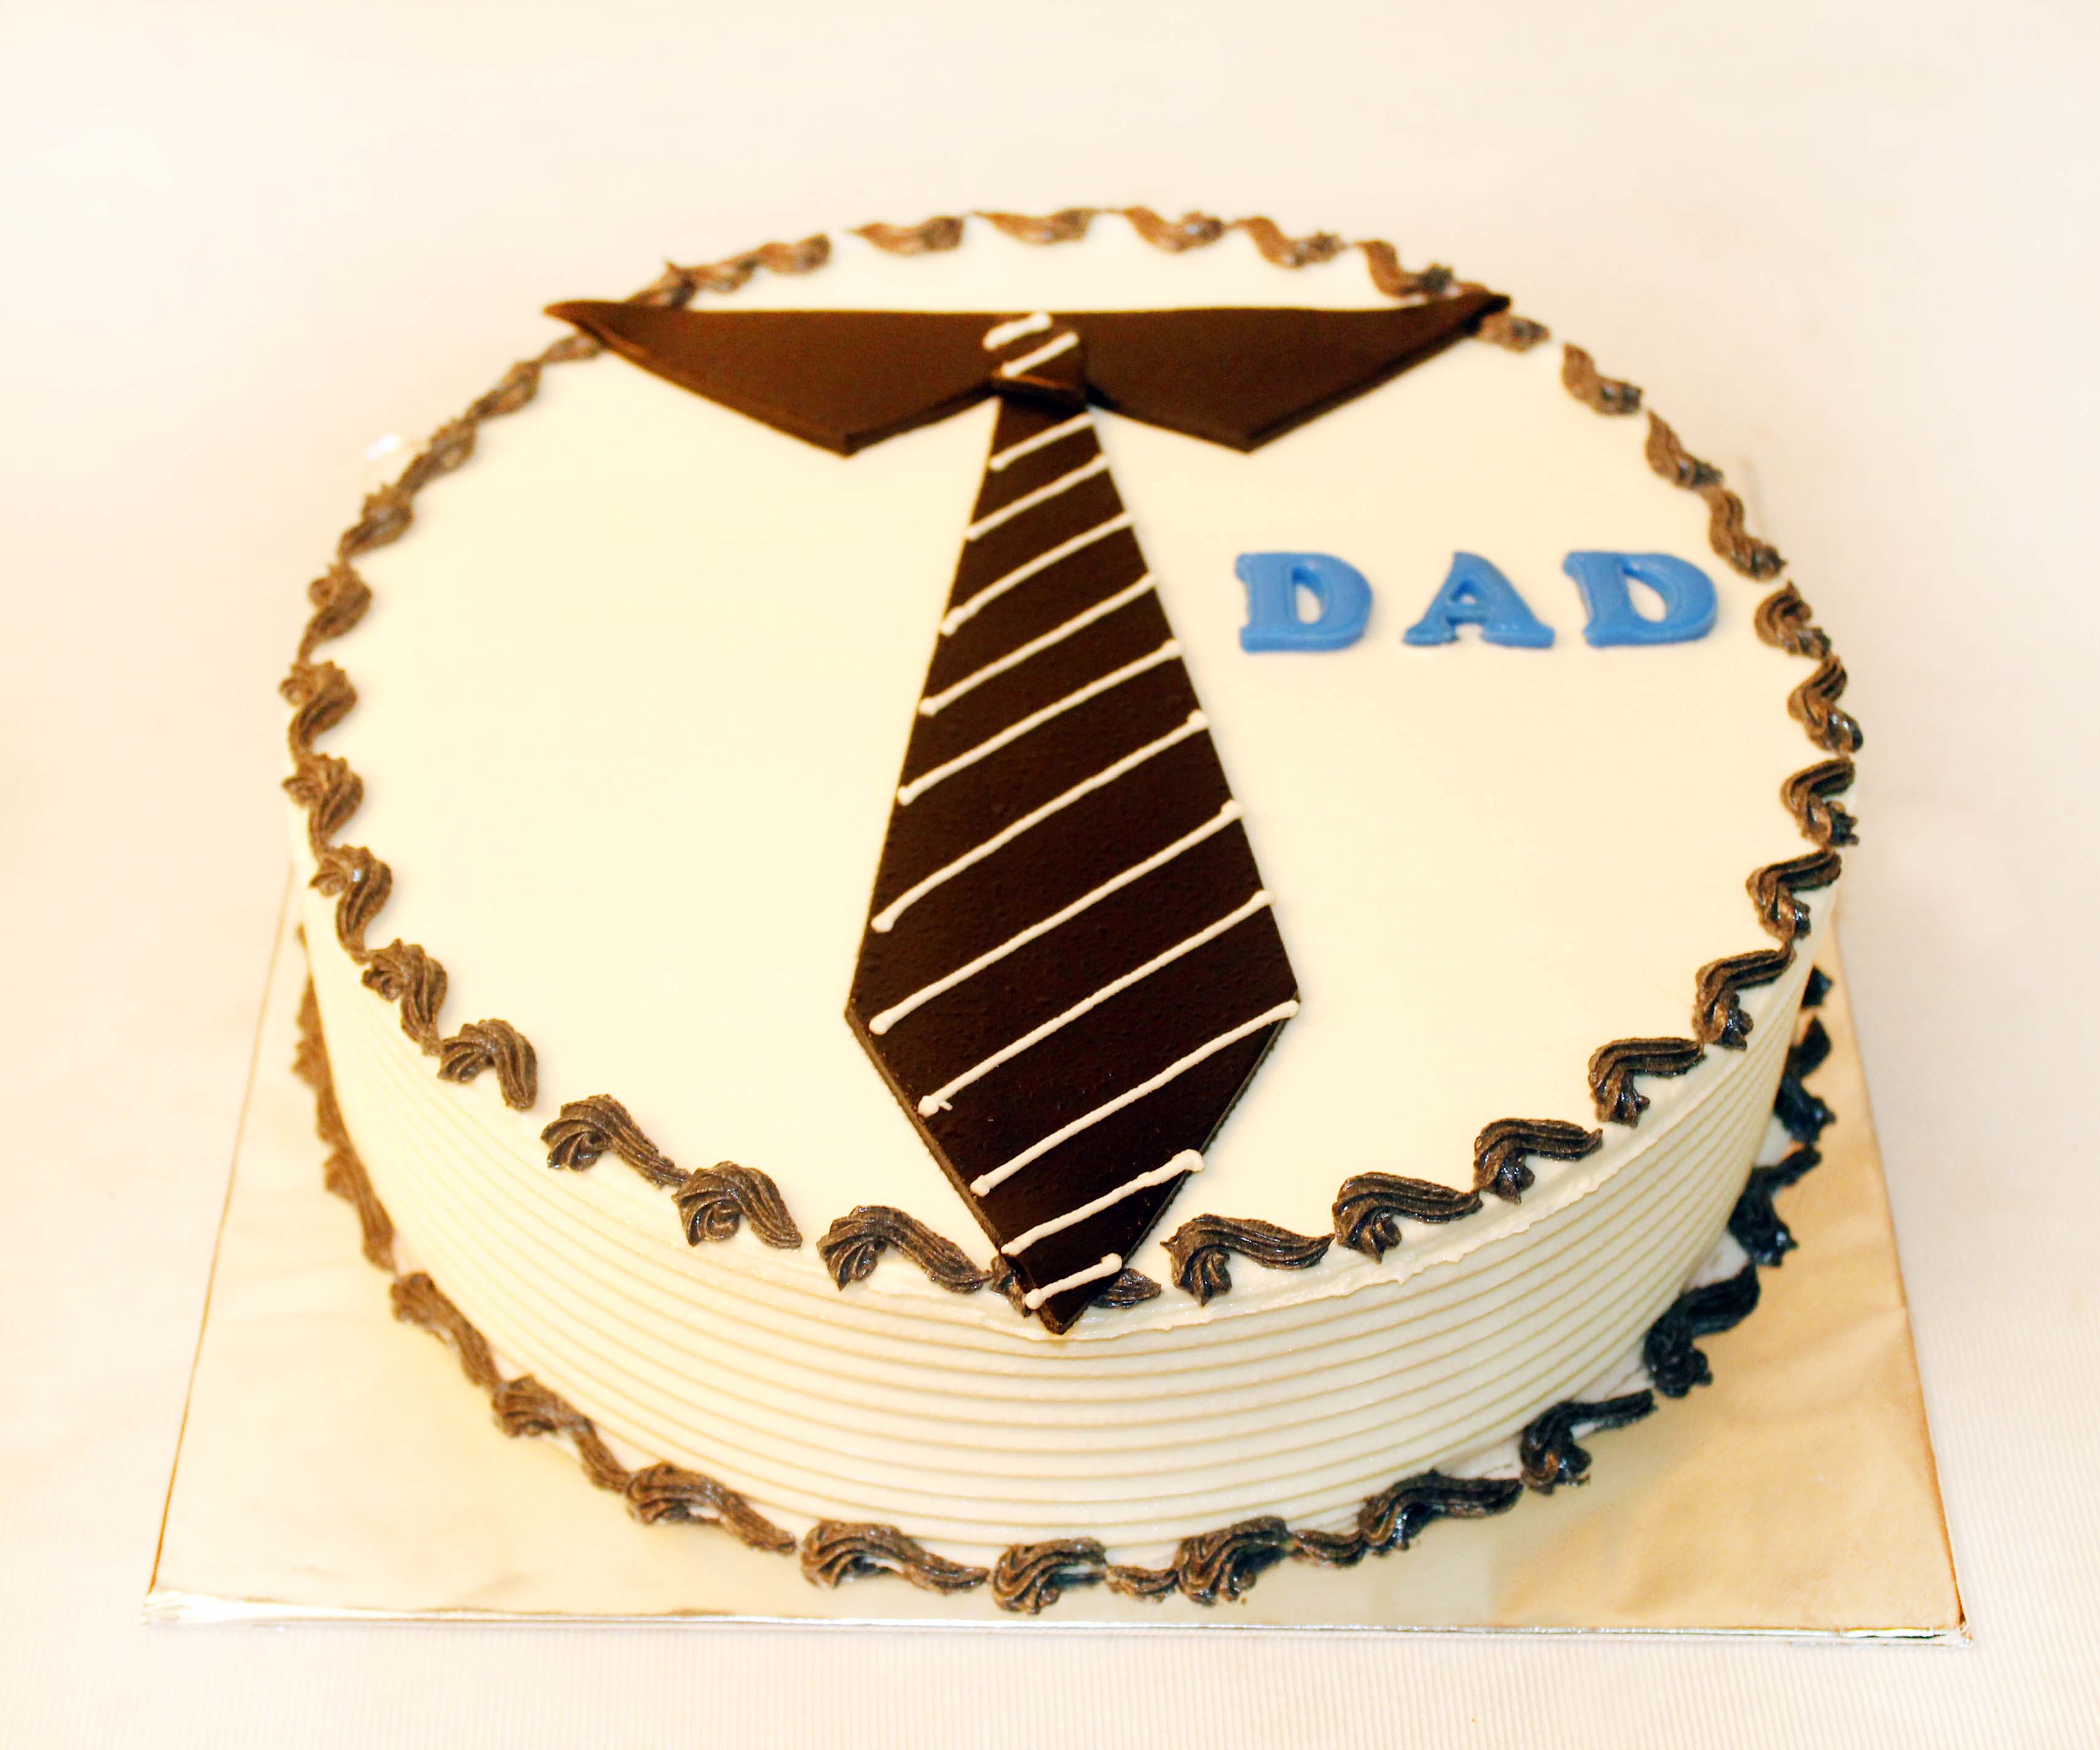 Father's day tie Cake 1 k.g butterscotch